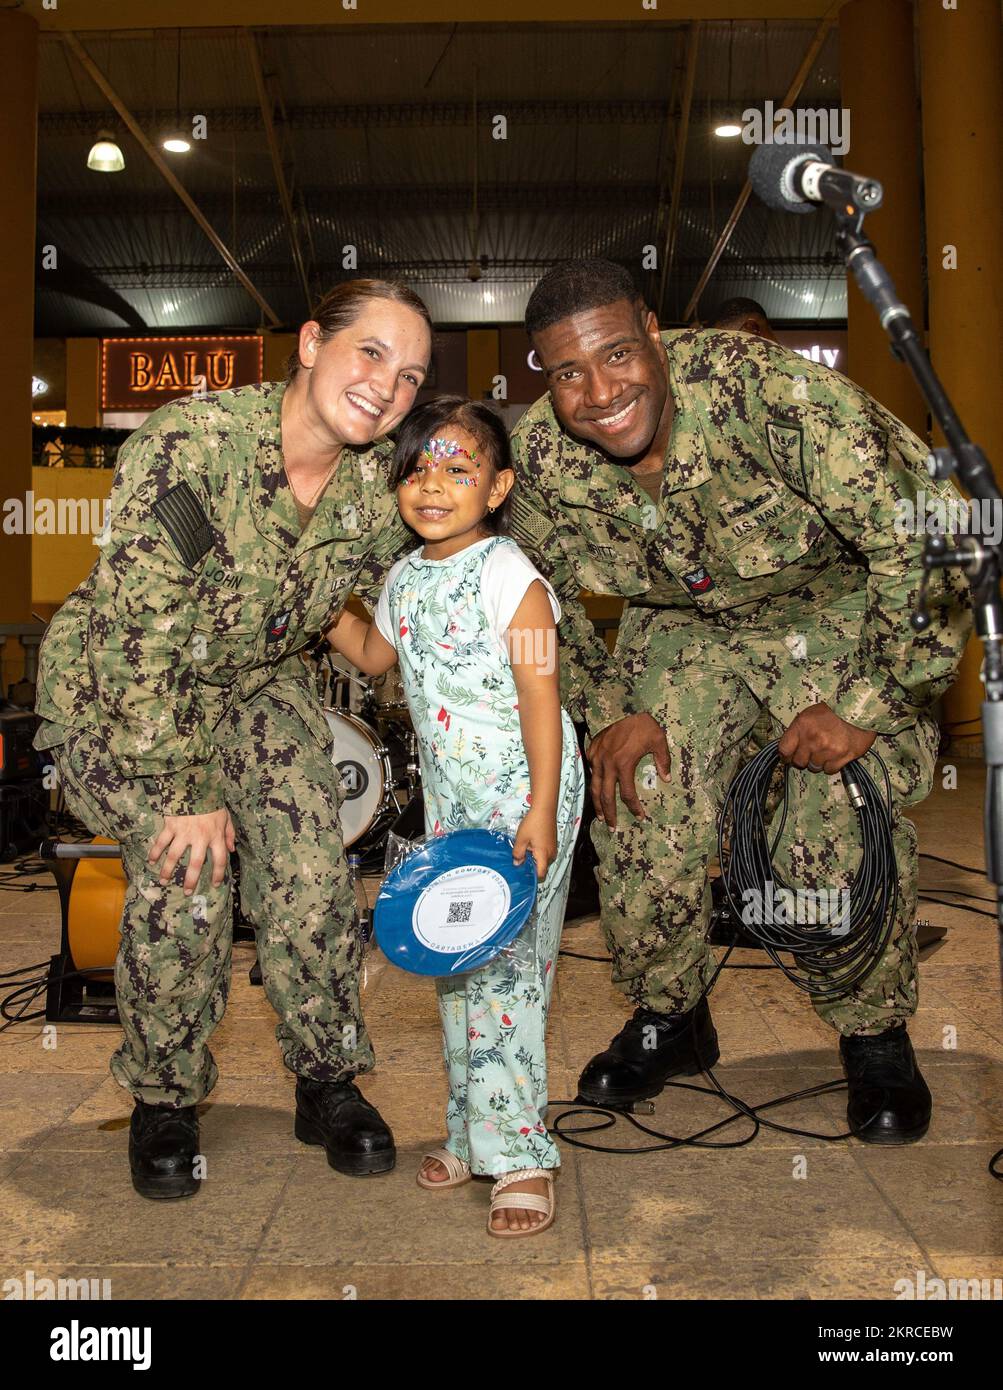 Musician 2nd Class Alyssa John, from Hettinger, North Dakota, left, and Musician 1st Class Brandon Britt, from Bowling Green, Kentucky, both assigned to U.S. Fleet Forces Band, pose for a photo with a child after a performance at La Castellana Shopping Mall in Cartagena, Colombia during Continuing Promise 2022, Nov. 13, 2022. CP22 is a humanitarian assistance and goodwill mission conducting direct medical care, expeditionary veterinary care, and subject matter expert exchanges with five partner nations in the Caribbean, Central and South America. Stock Photo